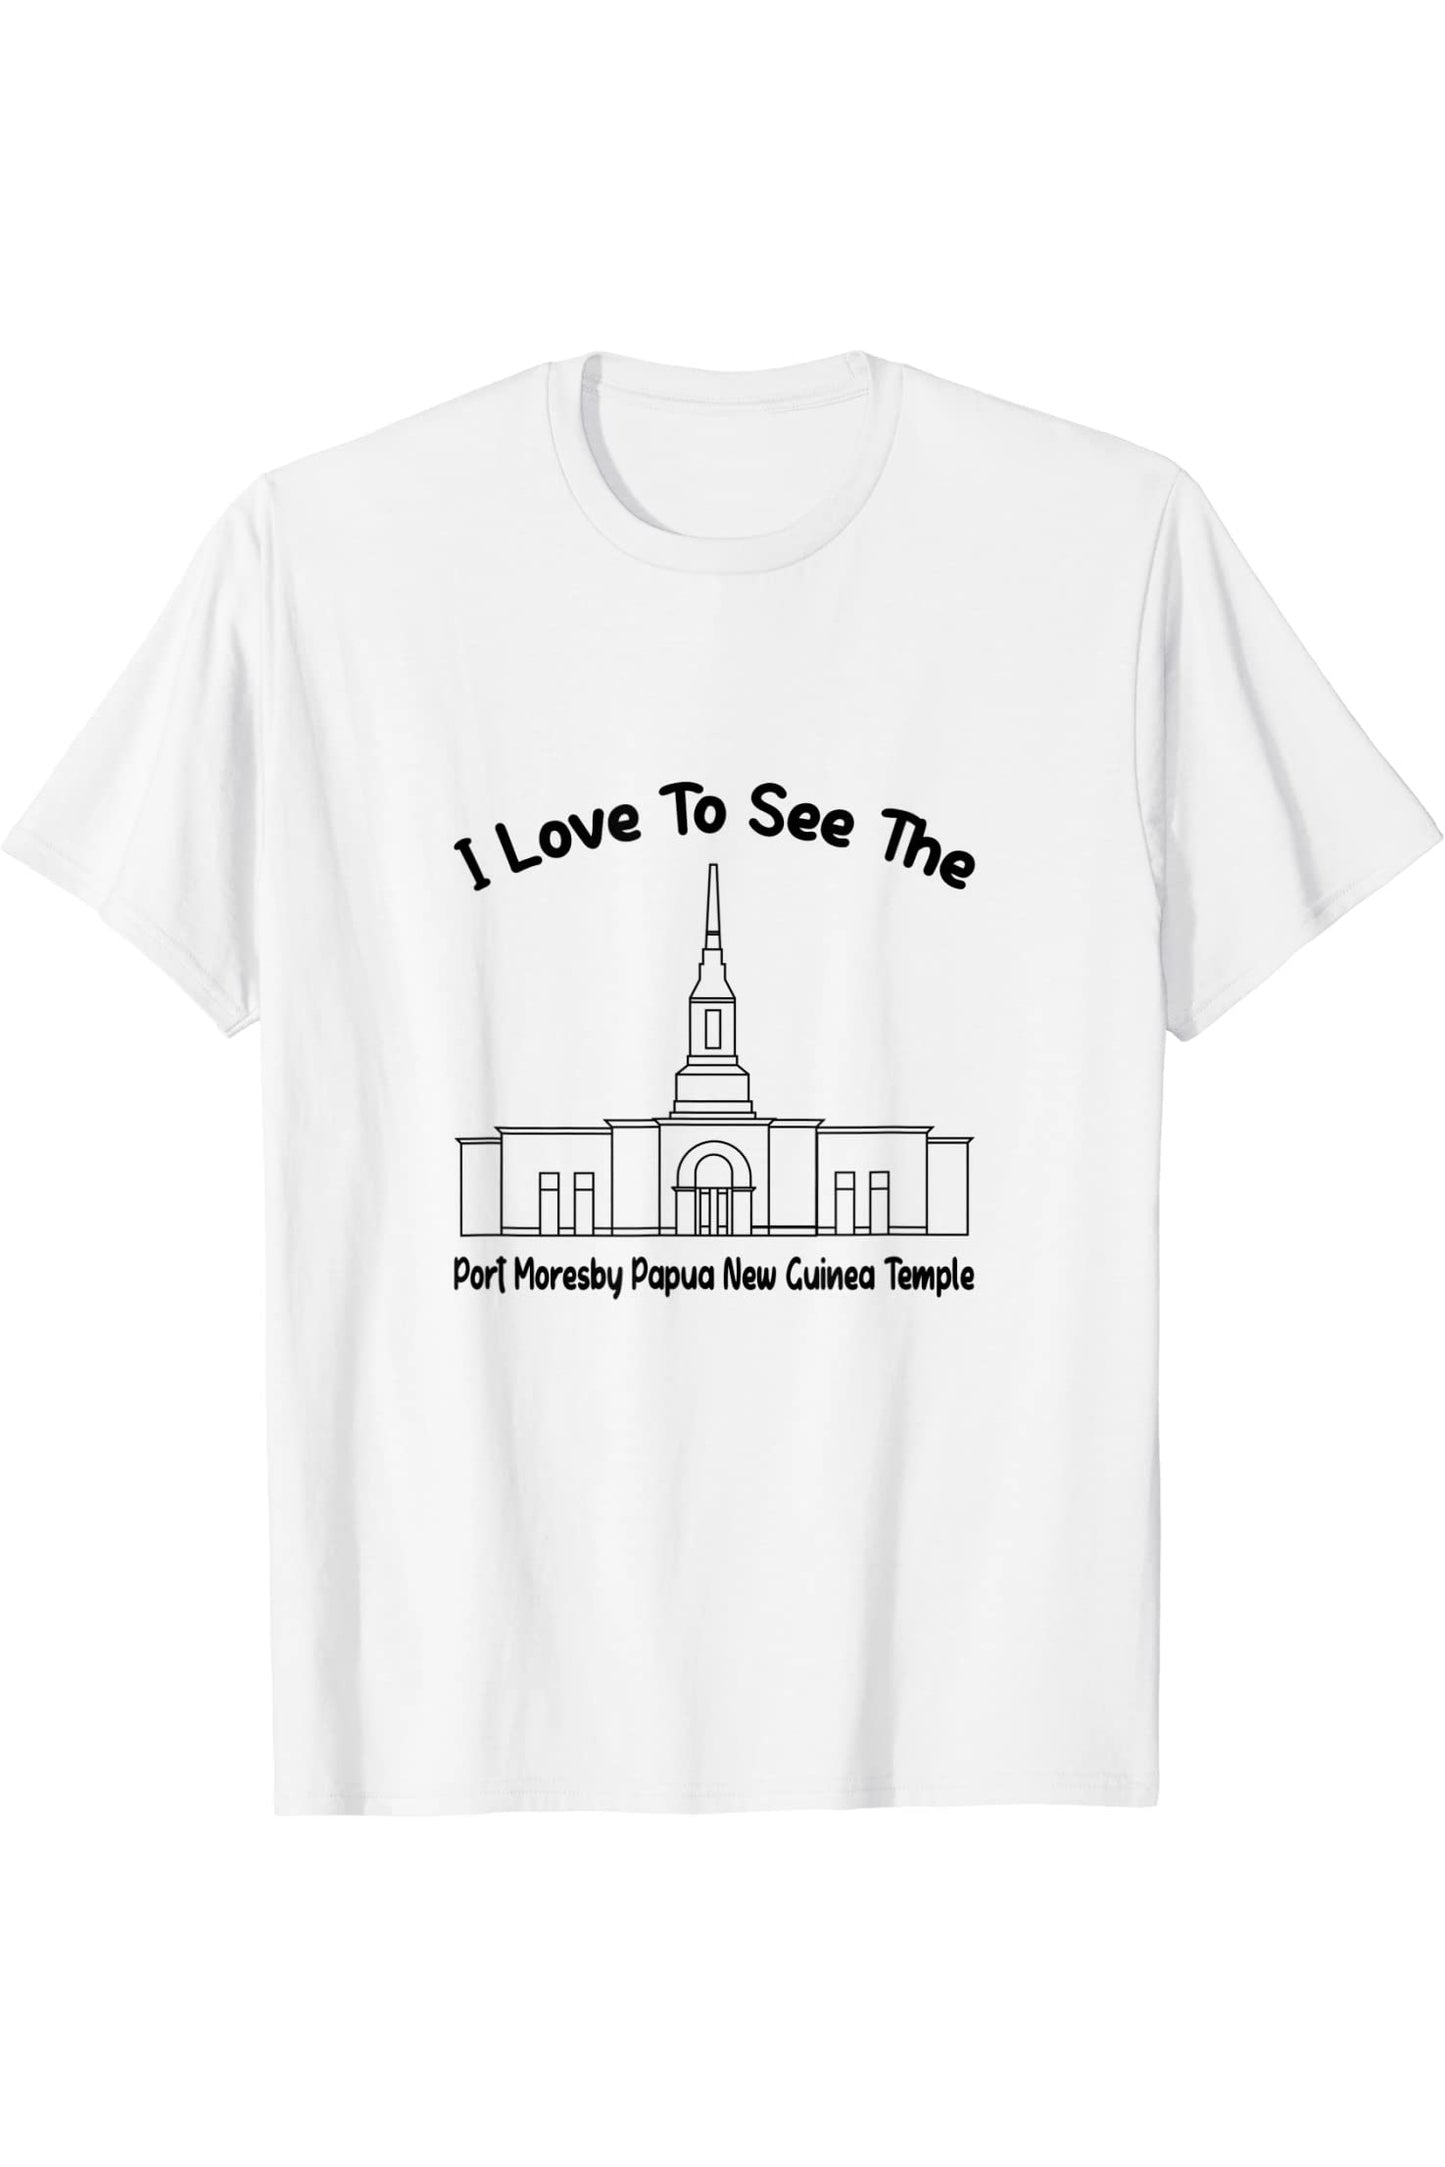 Port Moresby Papua New Guinea Temple T-Shirt - Primary Style (English) US